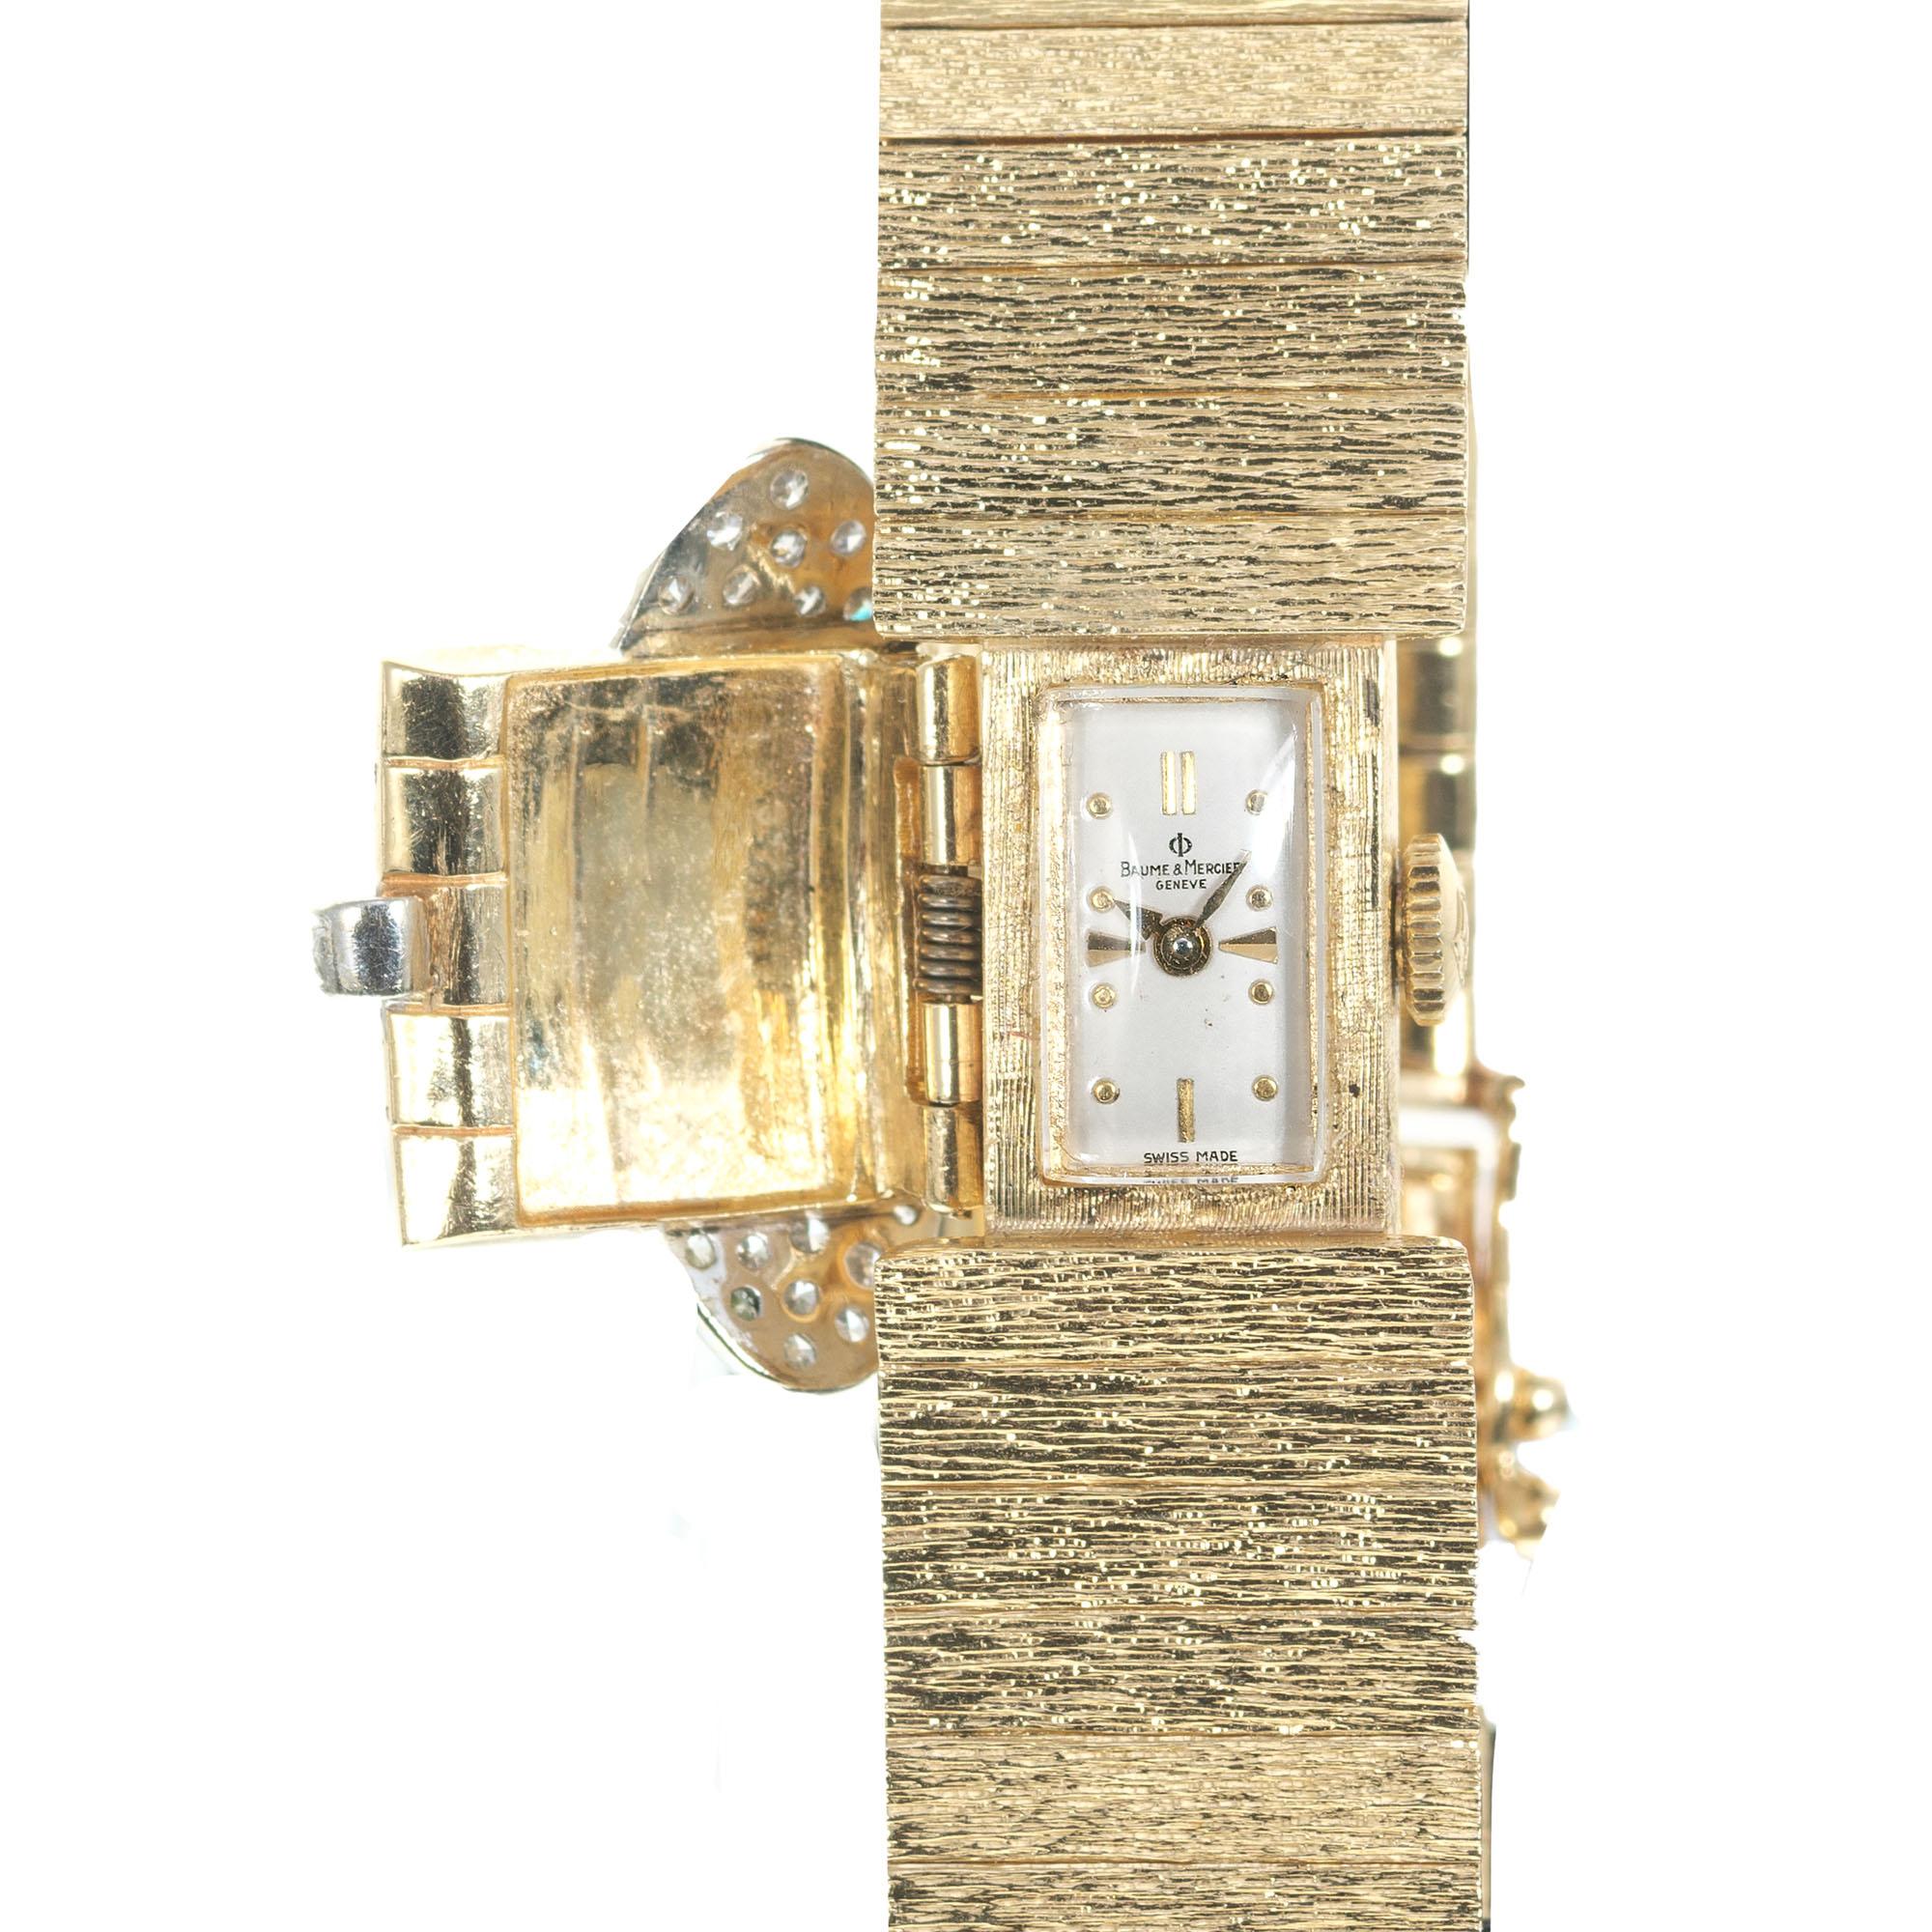 1950's hand textured 14k gold covered ladies watch with diamond accents set in 14k yellow gold 

32 diamonds, approx. .75cts
Length: 31.62mm
Width: 18.05mm
Band width at case: 15.05mm
Case thickness: 9.70mm
Band: 14k textured gold 
Crystal: